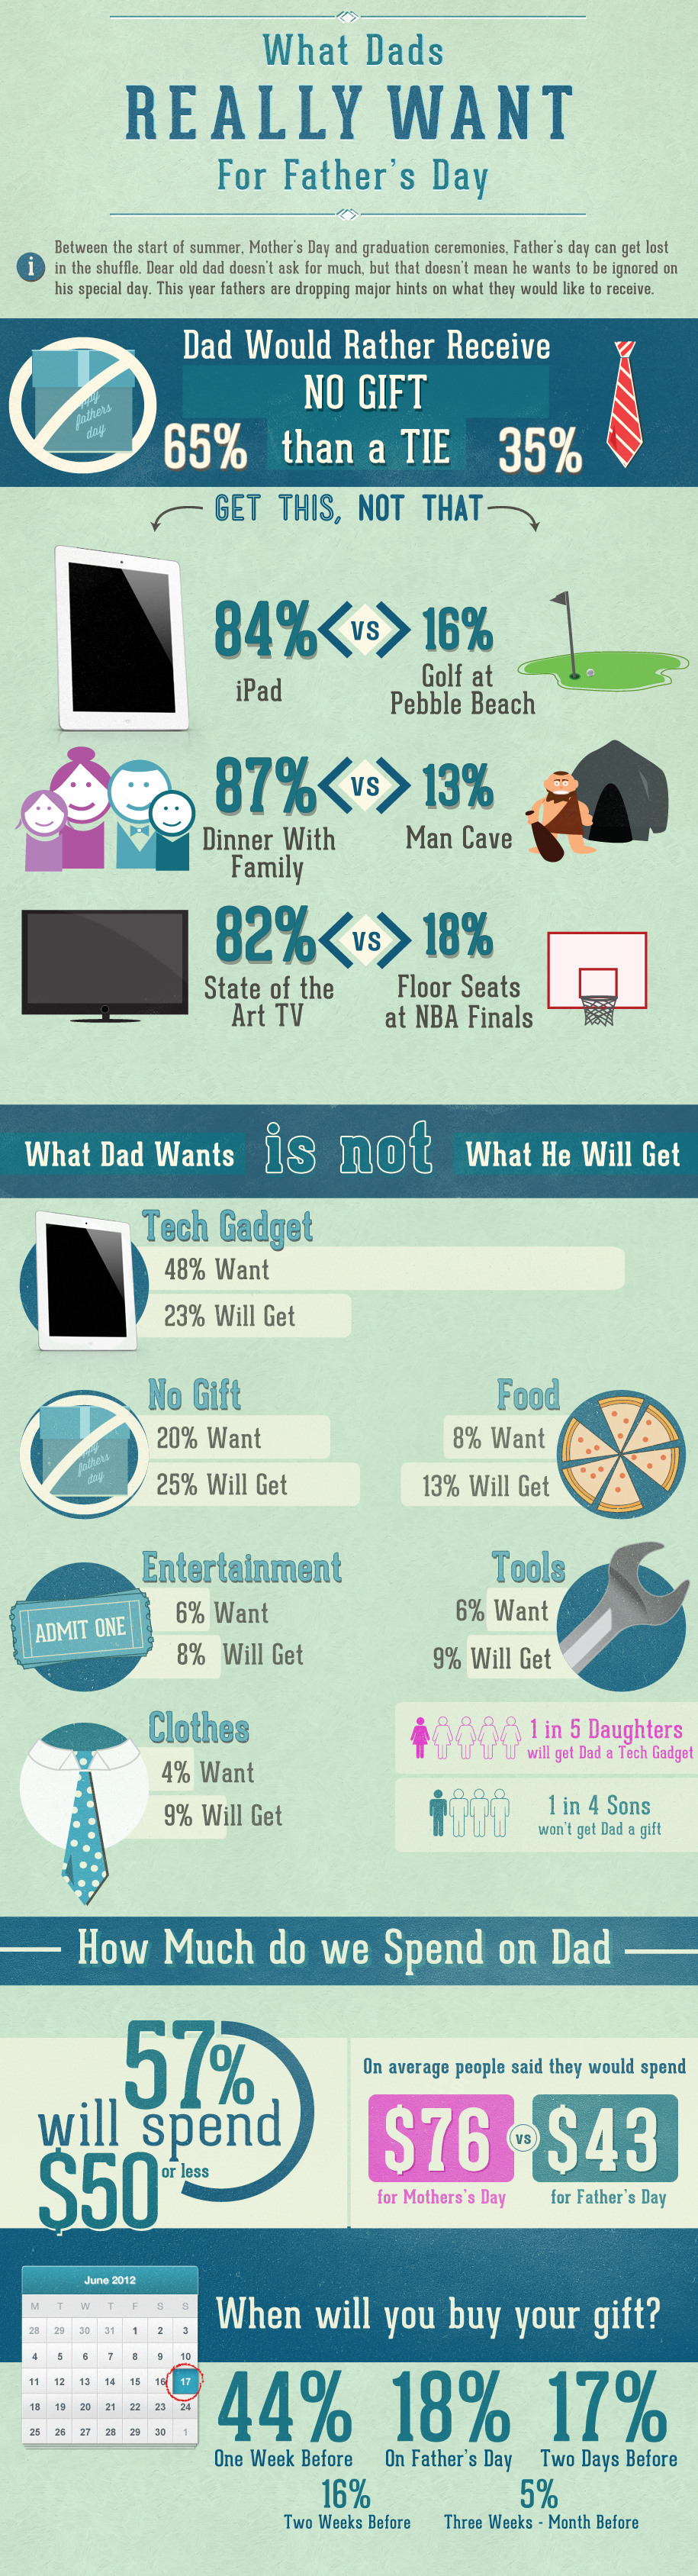 Father's Day infographic